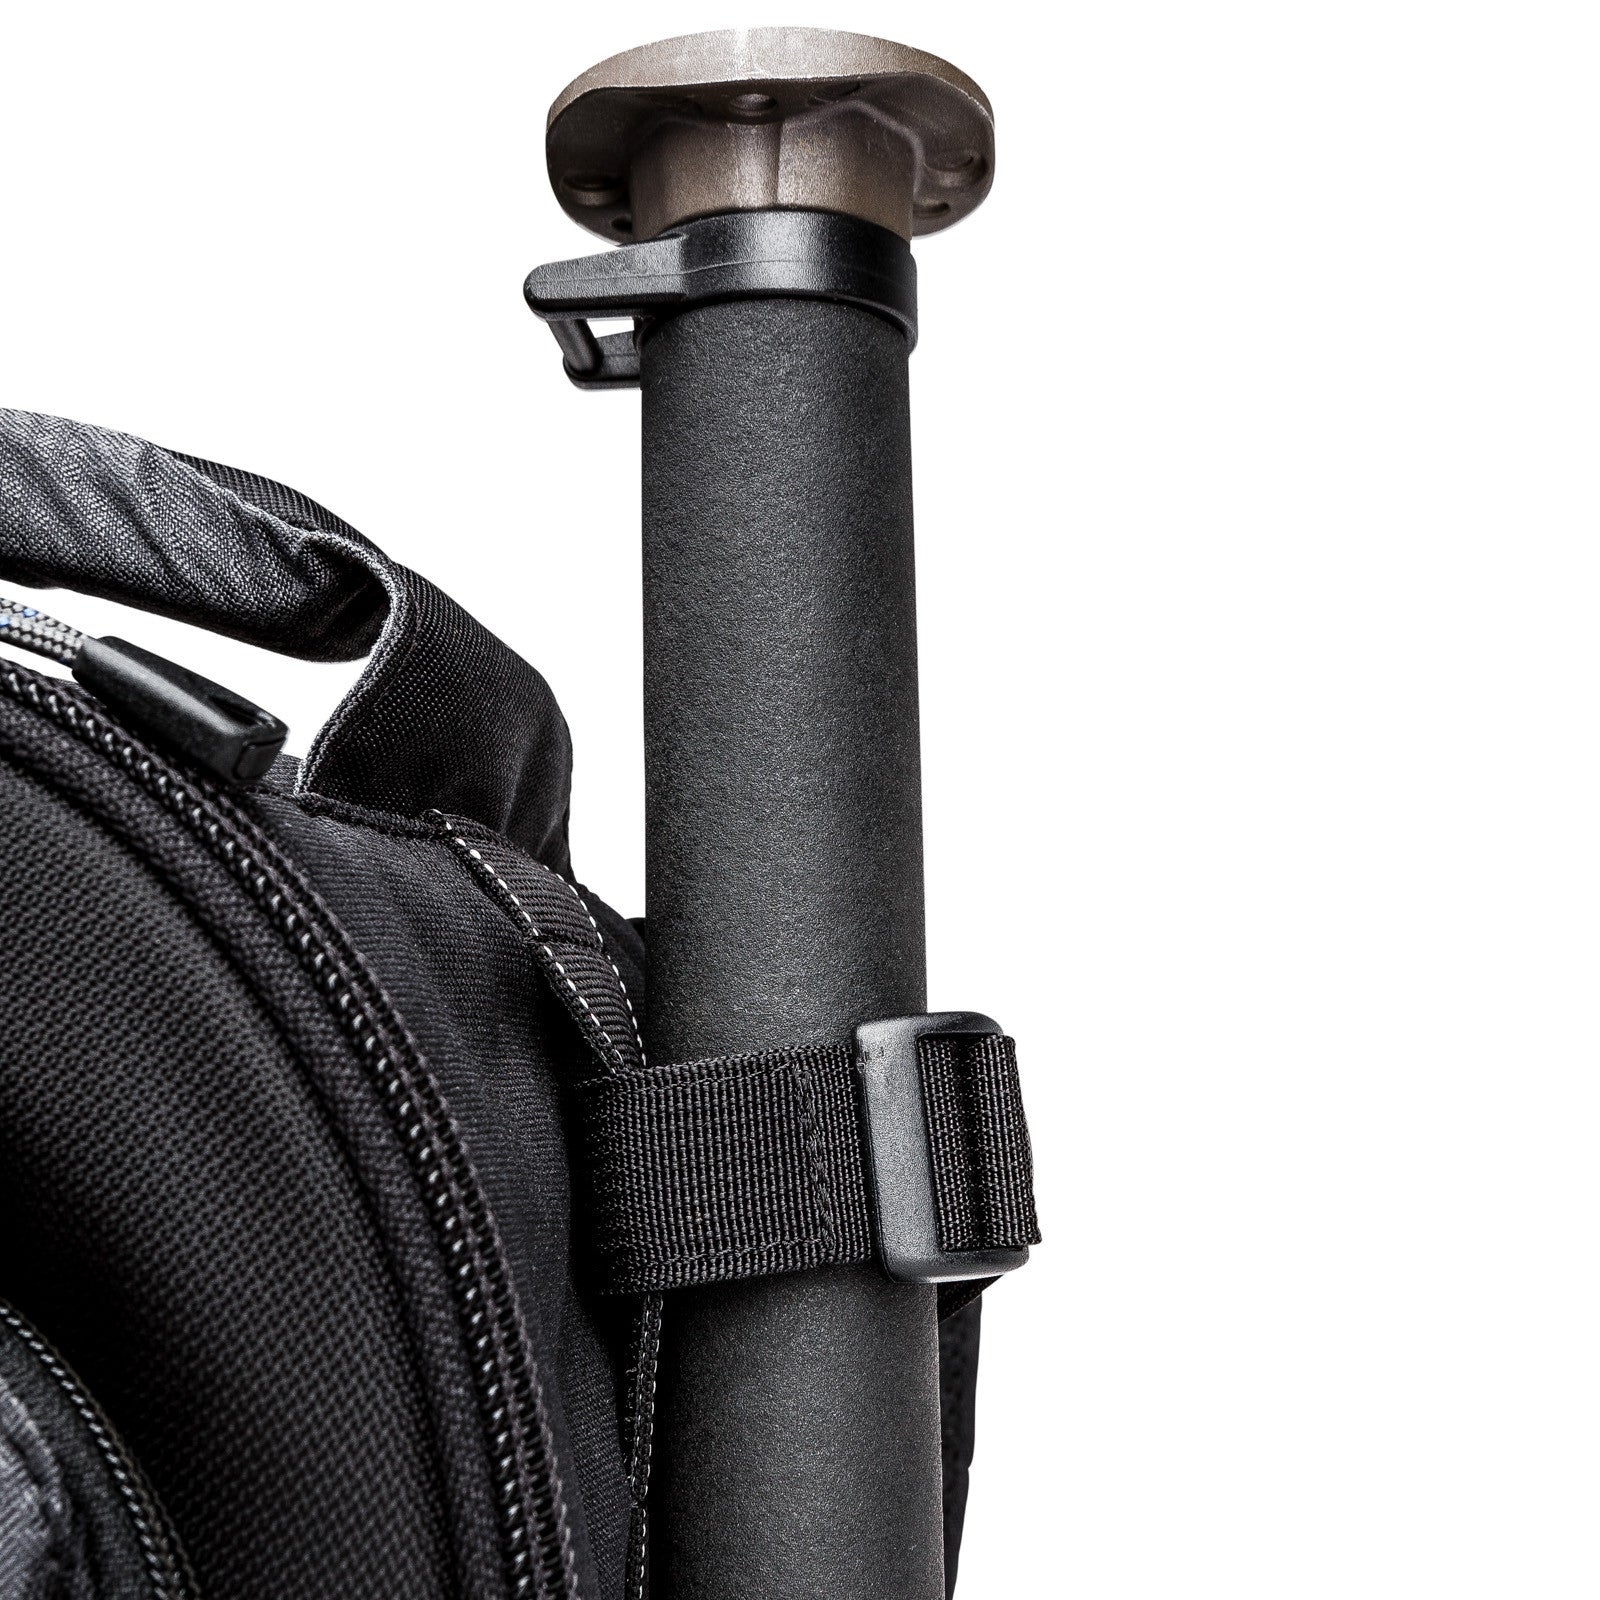 Carry a tripod or a monopod on either side with included straps